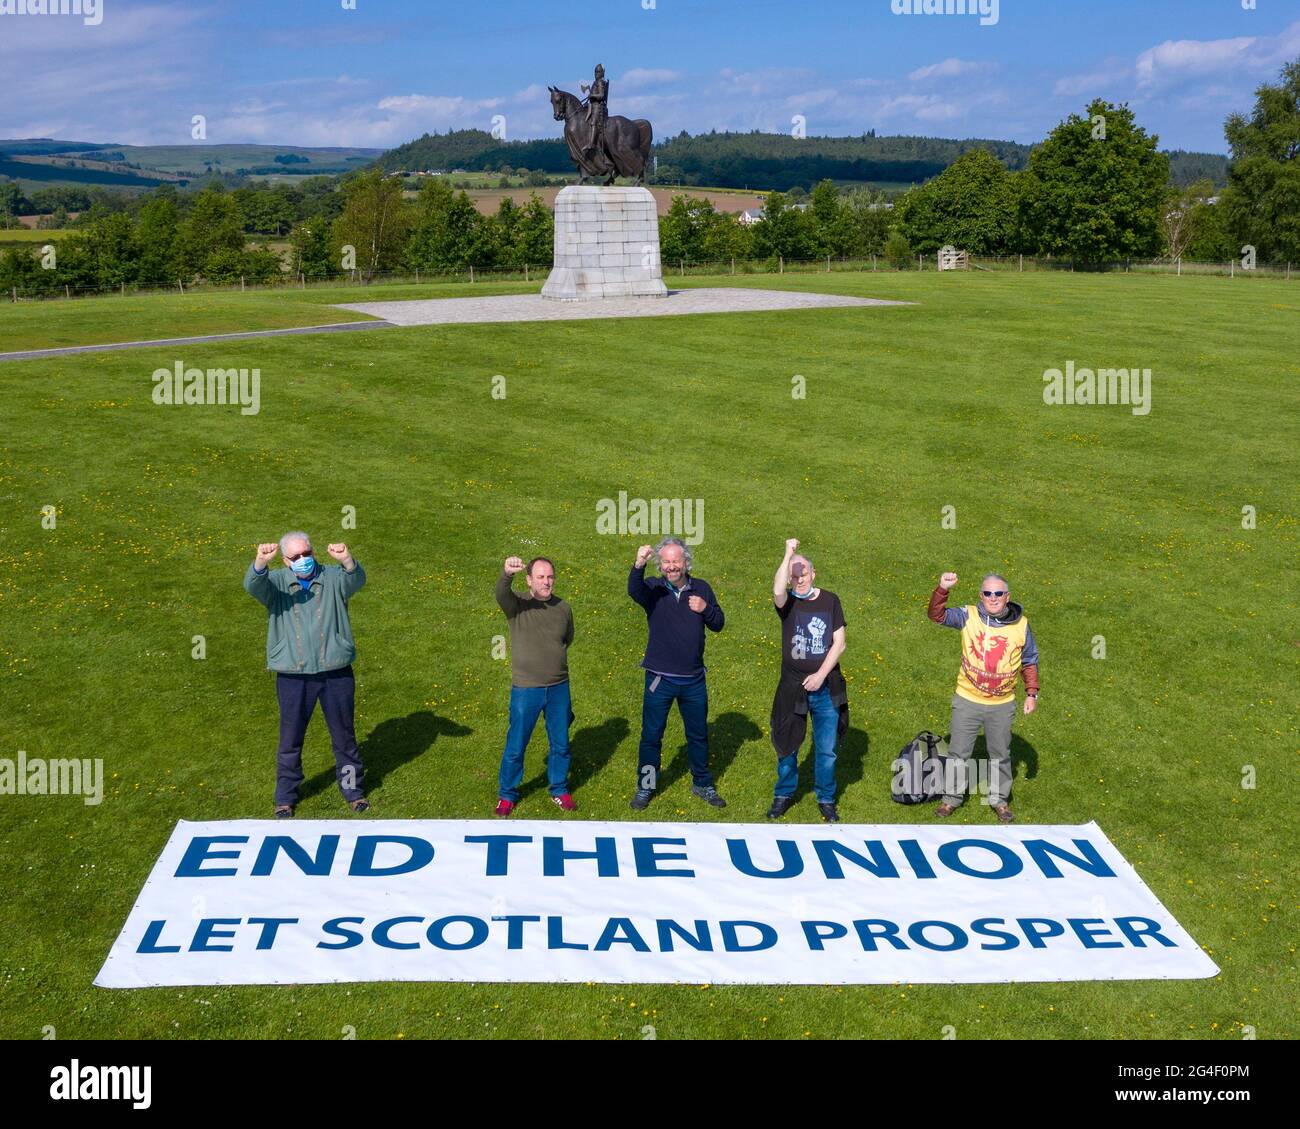 Battle of Bannockburn site, Stirling, Scotland, UK. 21st June, 2021. PICTURED: Sean Clerkin of Action for Scotland, (seen wearing black T-shirt) seen with fellow protestors at the site of the Battle of Bannockburn in front of the Robert the Bruce statue with a large protest banner which reads, ‘END THE UNION LET SCOTLAND PROSPER' in large capital letters. Pic Credit: Colin Fisher/Alamy Live News Stock Photo